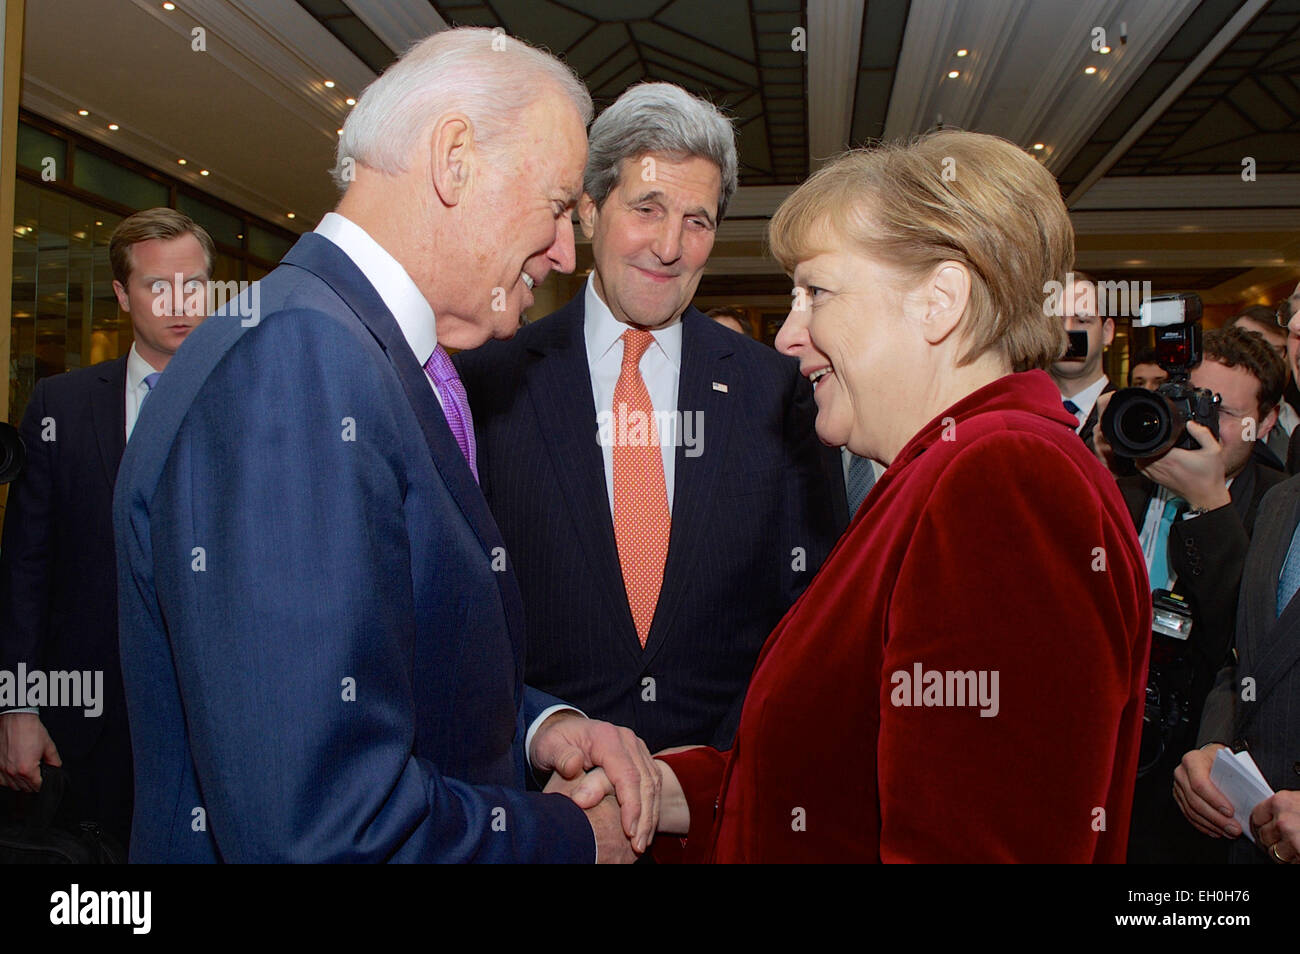 U.S. Secretary of State John Kerry watches as Vice President Joe Biden greets German Chancellor Angela Merkel after she arrived at the Munich Security Conference in Munich, Germany, on February 7, 2015, to deliver a speech and meet with U.S., Ukrainian, and other government officials. Stock Photo